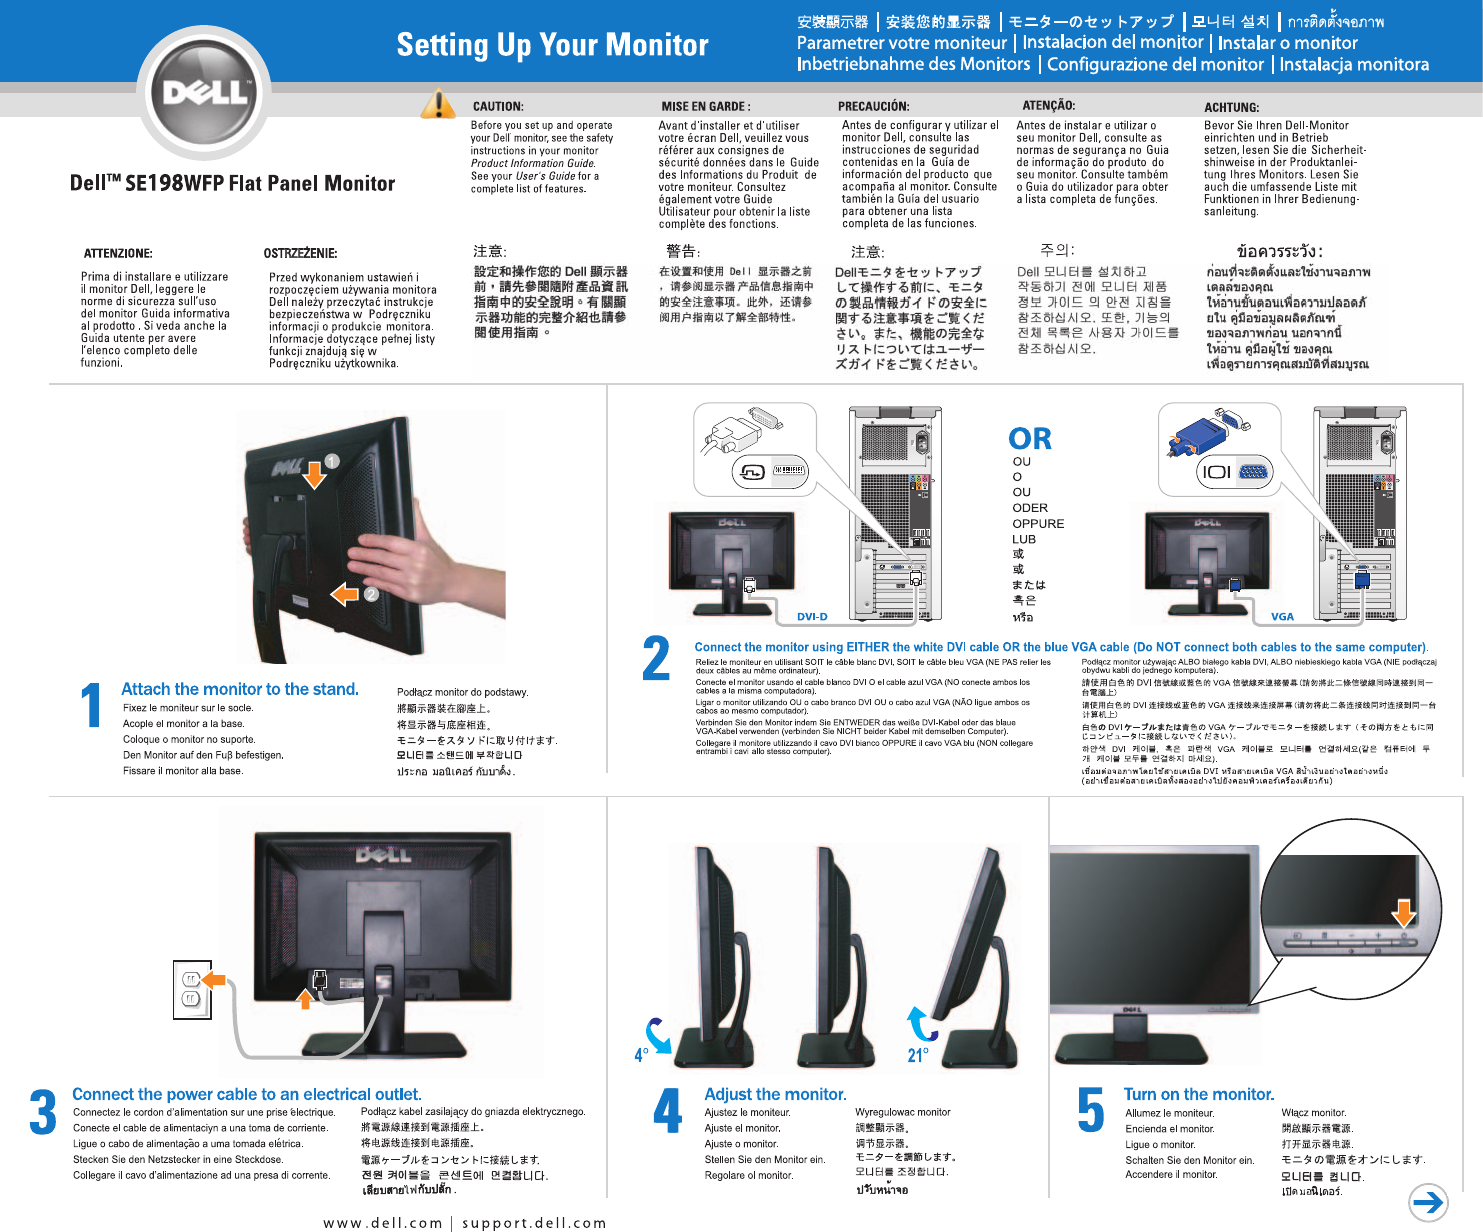 Page 1 of 2 - Dell Dell-se198wfp SE198WFP Monitor ภาพแสดงการติดตั้ง User Manual  - Setup Guide Th-th